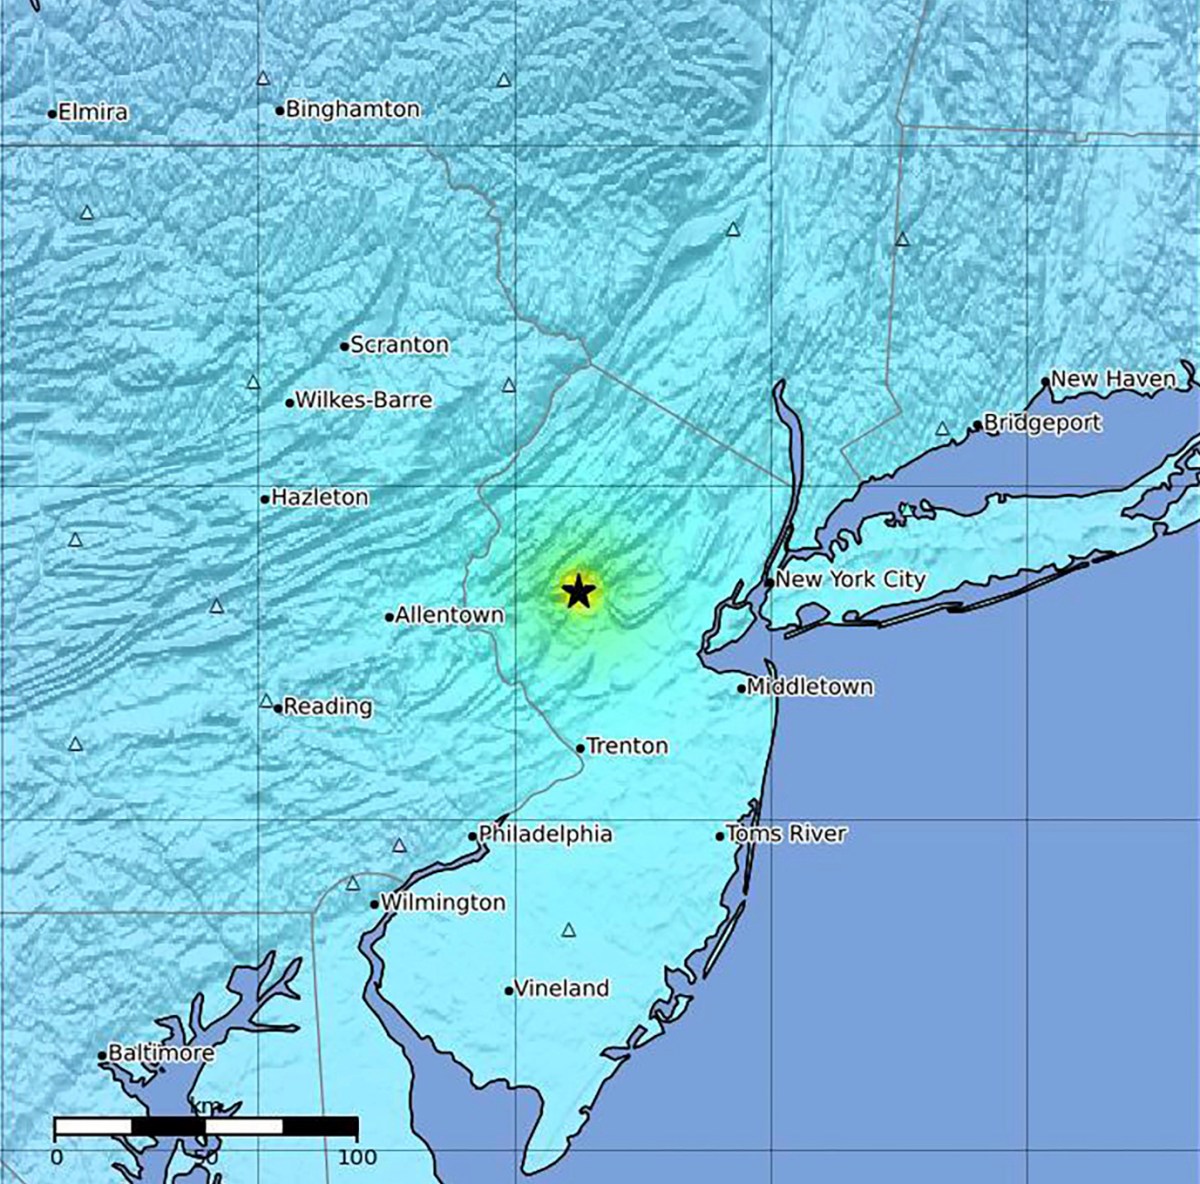 Map of epicenter of earthquake that impacted New York City